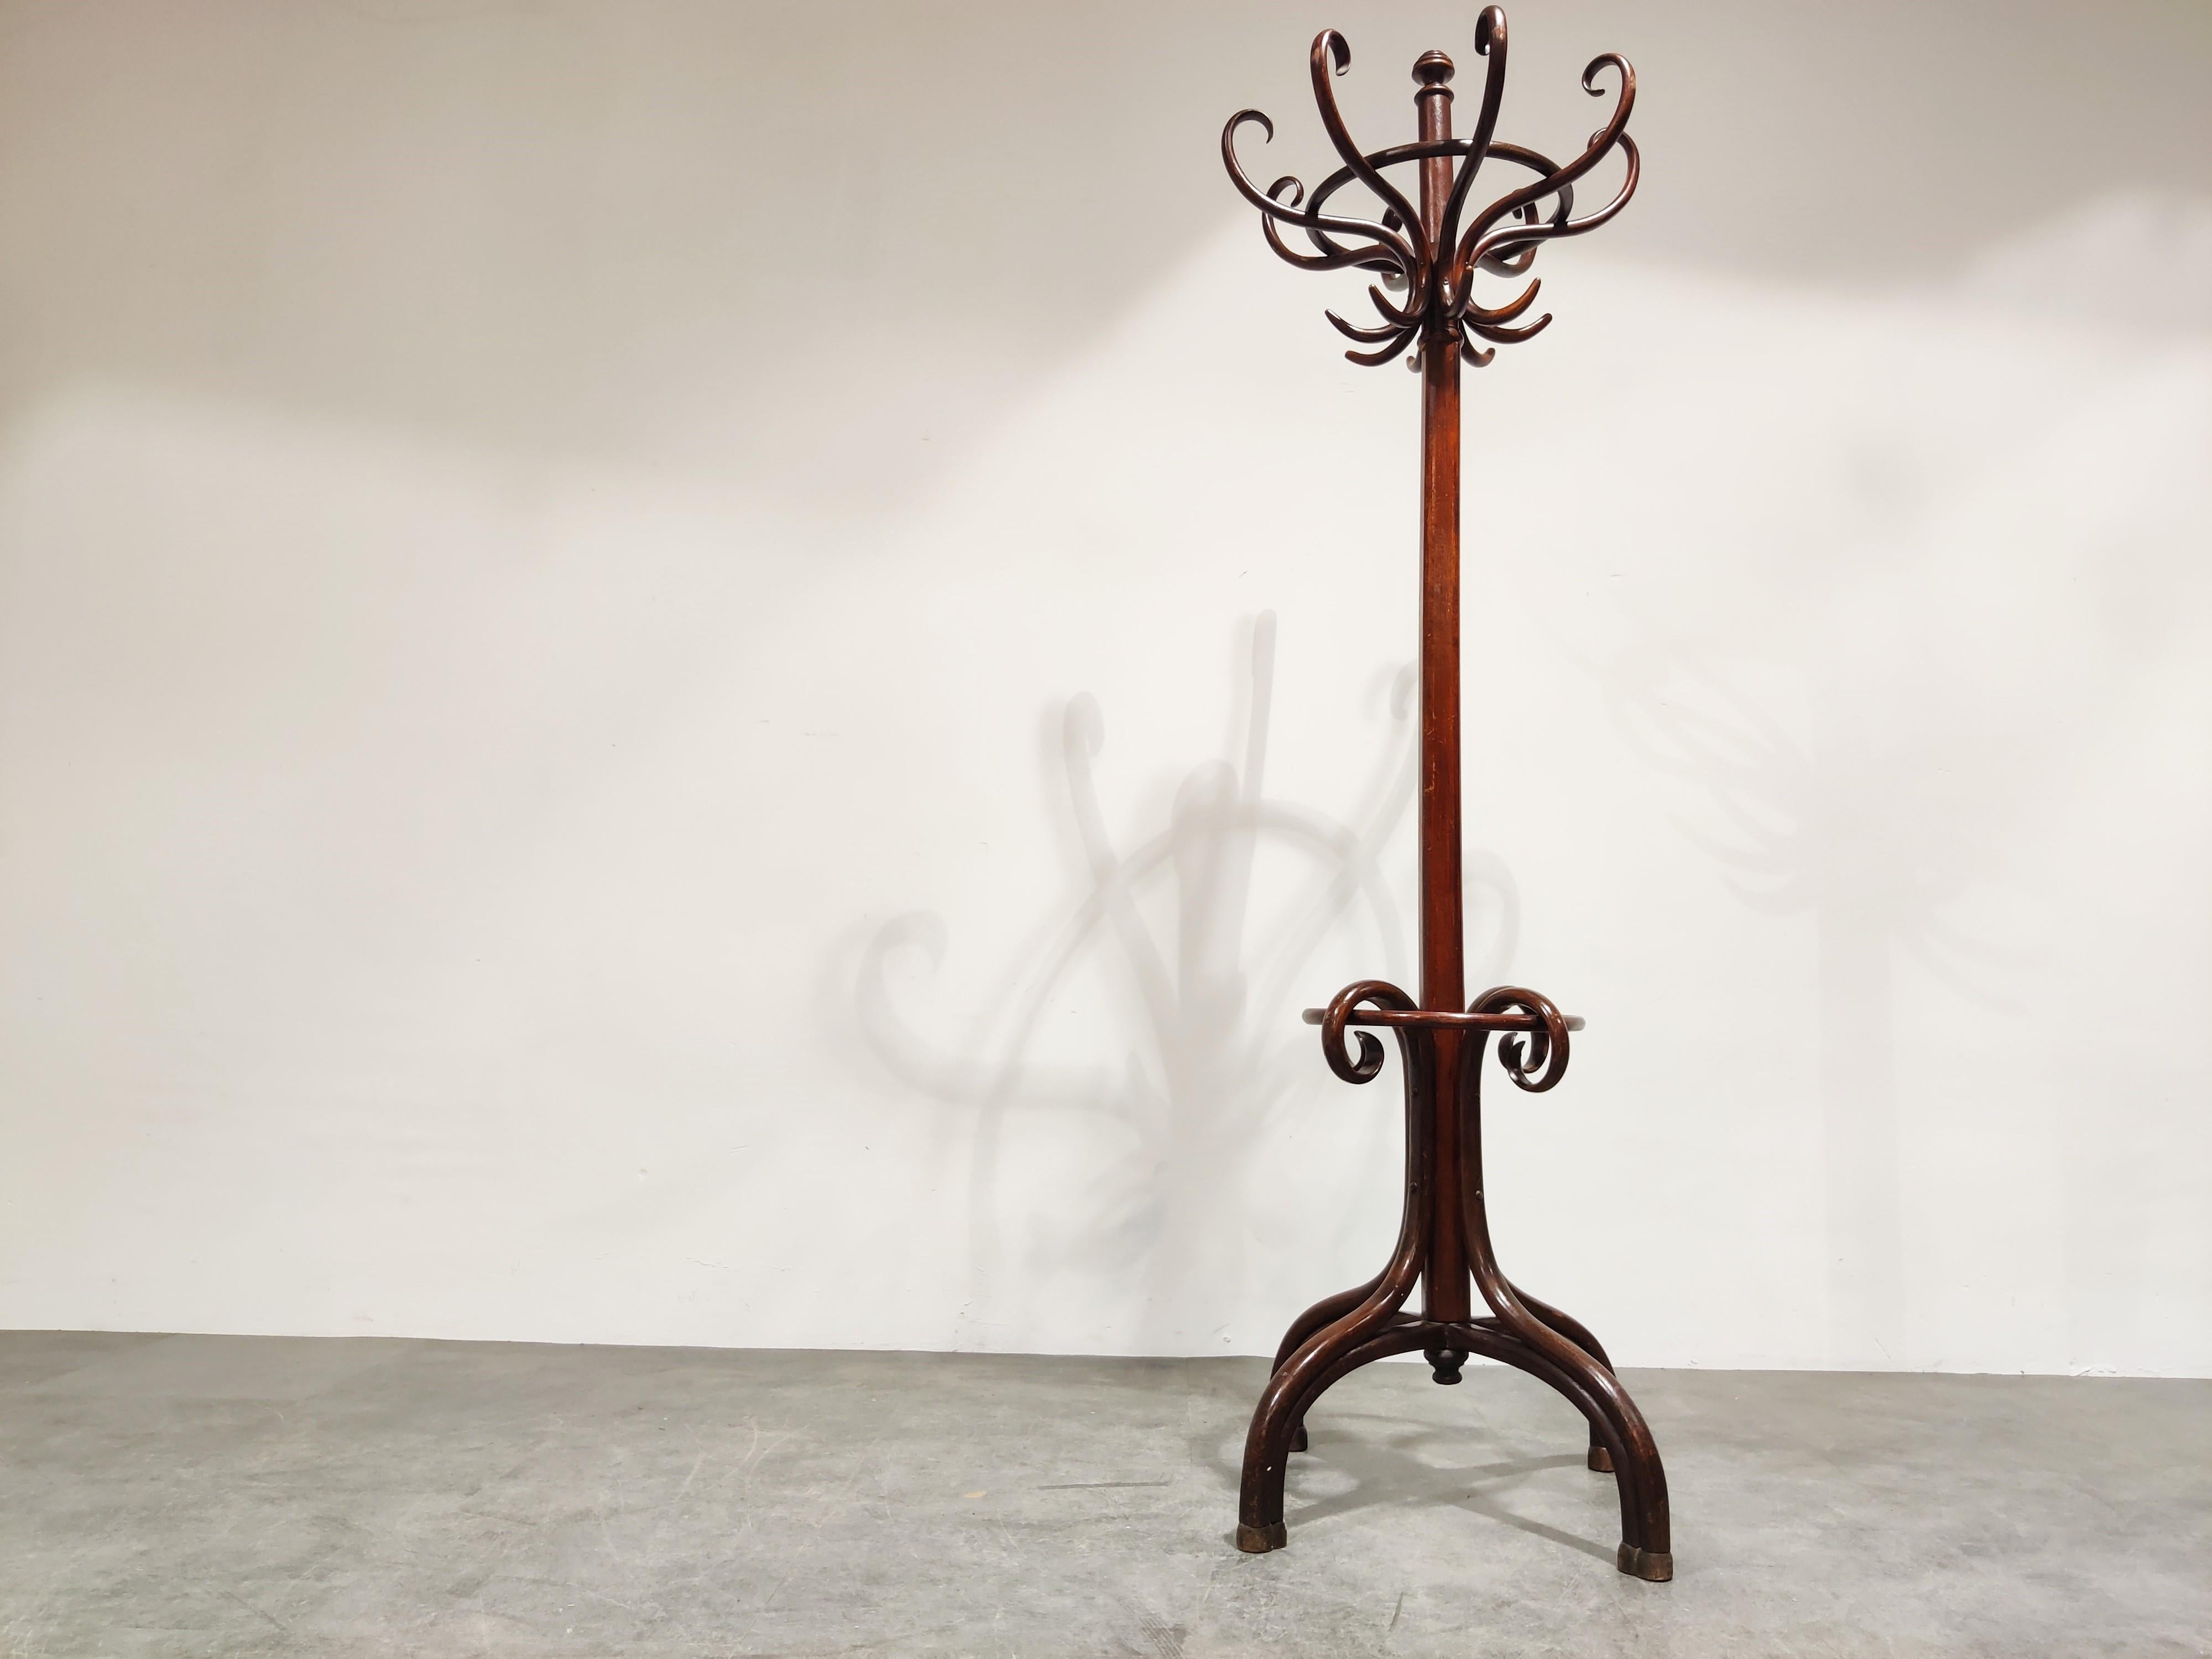 Early 20th century coat stand designed by Michael Thonet for Thonet model number 10401. (see catalogue picture attached)

Stamp still visible. 

Beautiful art nouveau era piece which is very decorative and still very usable today.

It provides